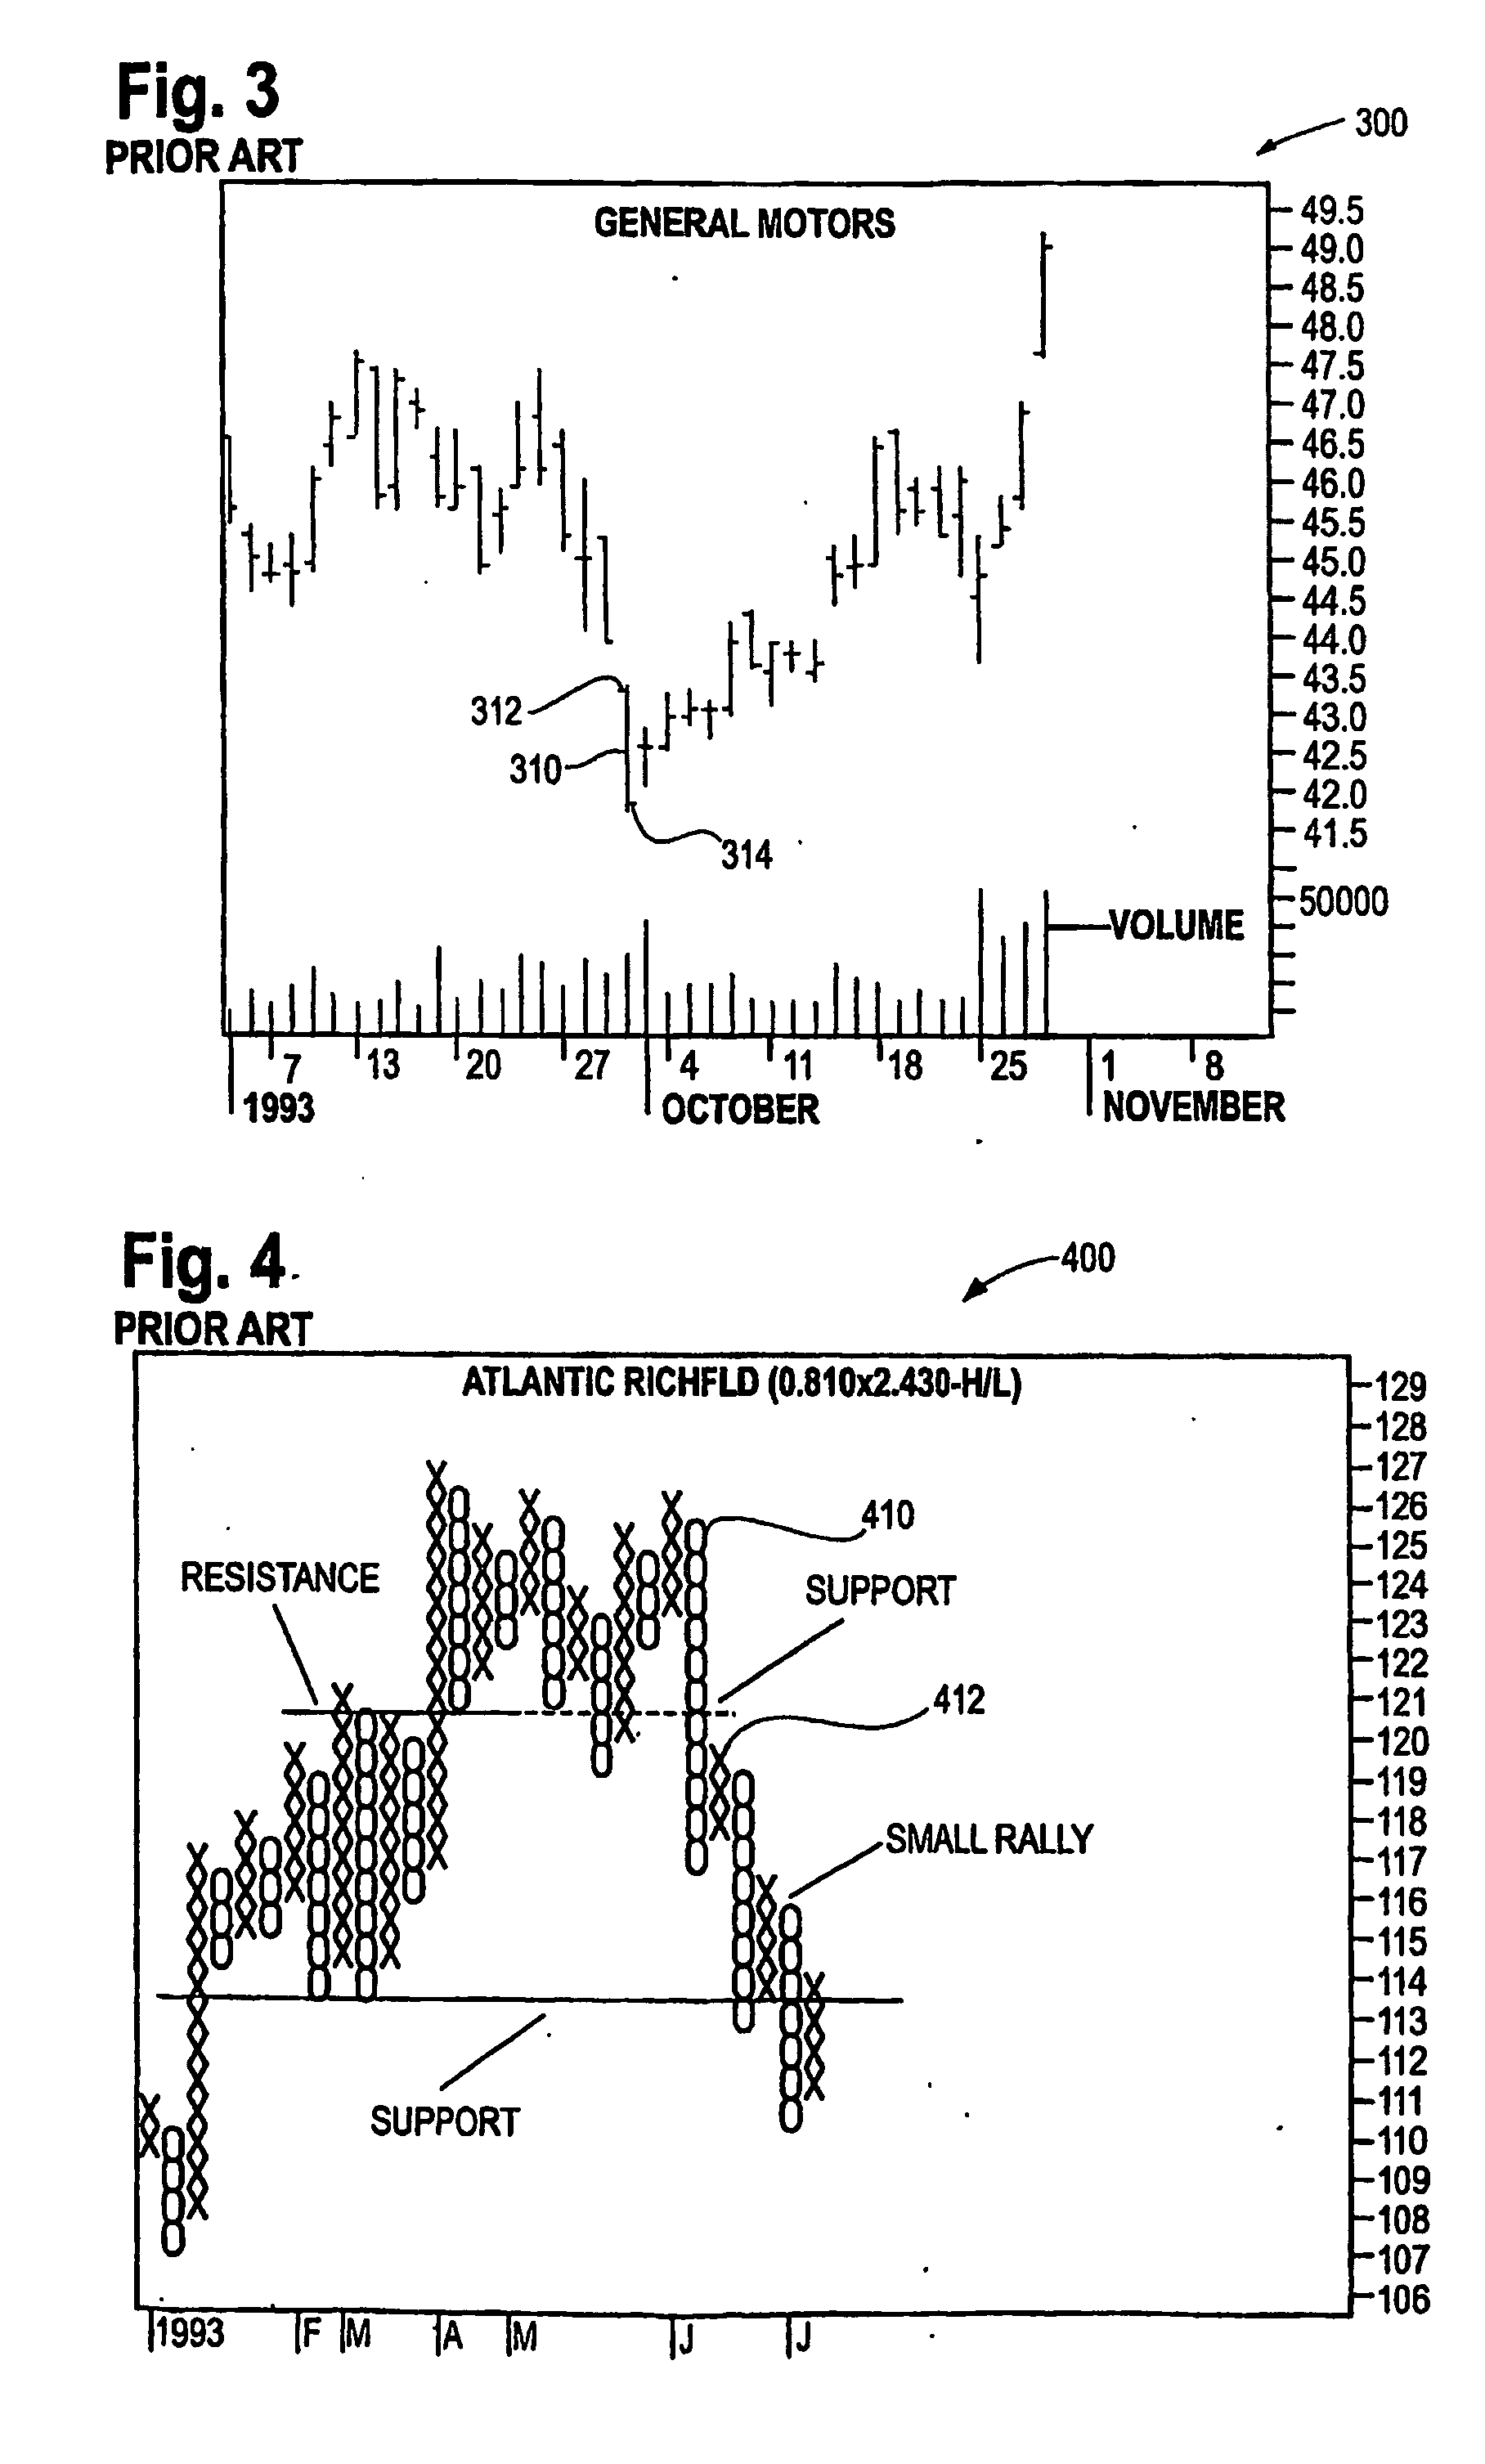 System and method for analyzing and displaying security trade transactions